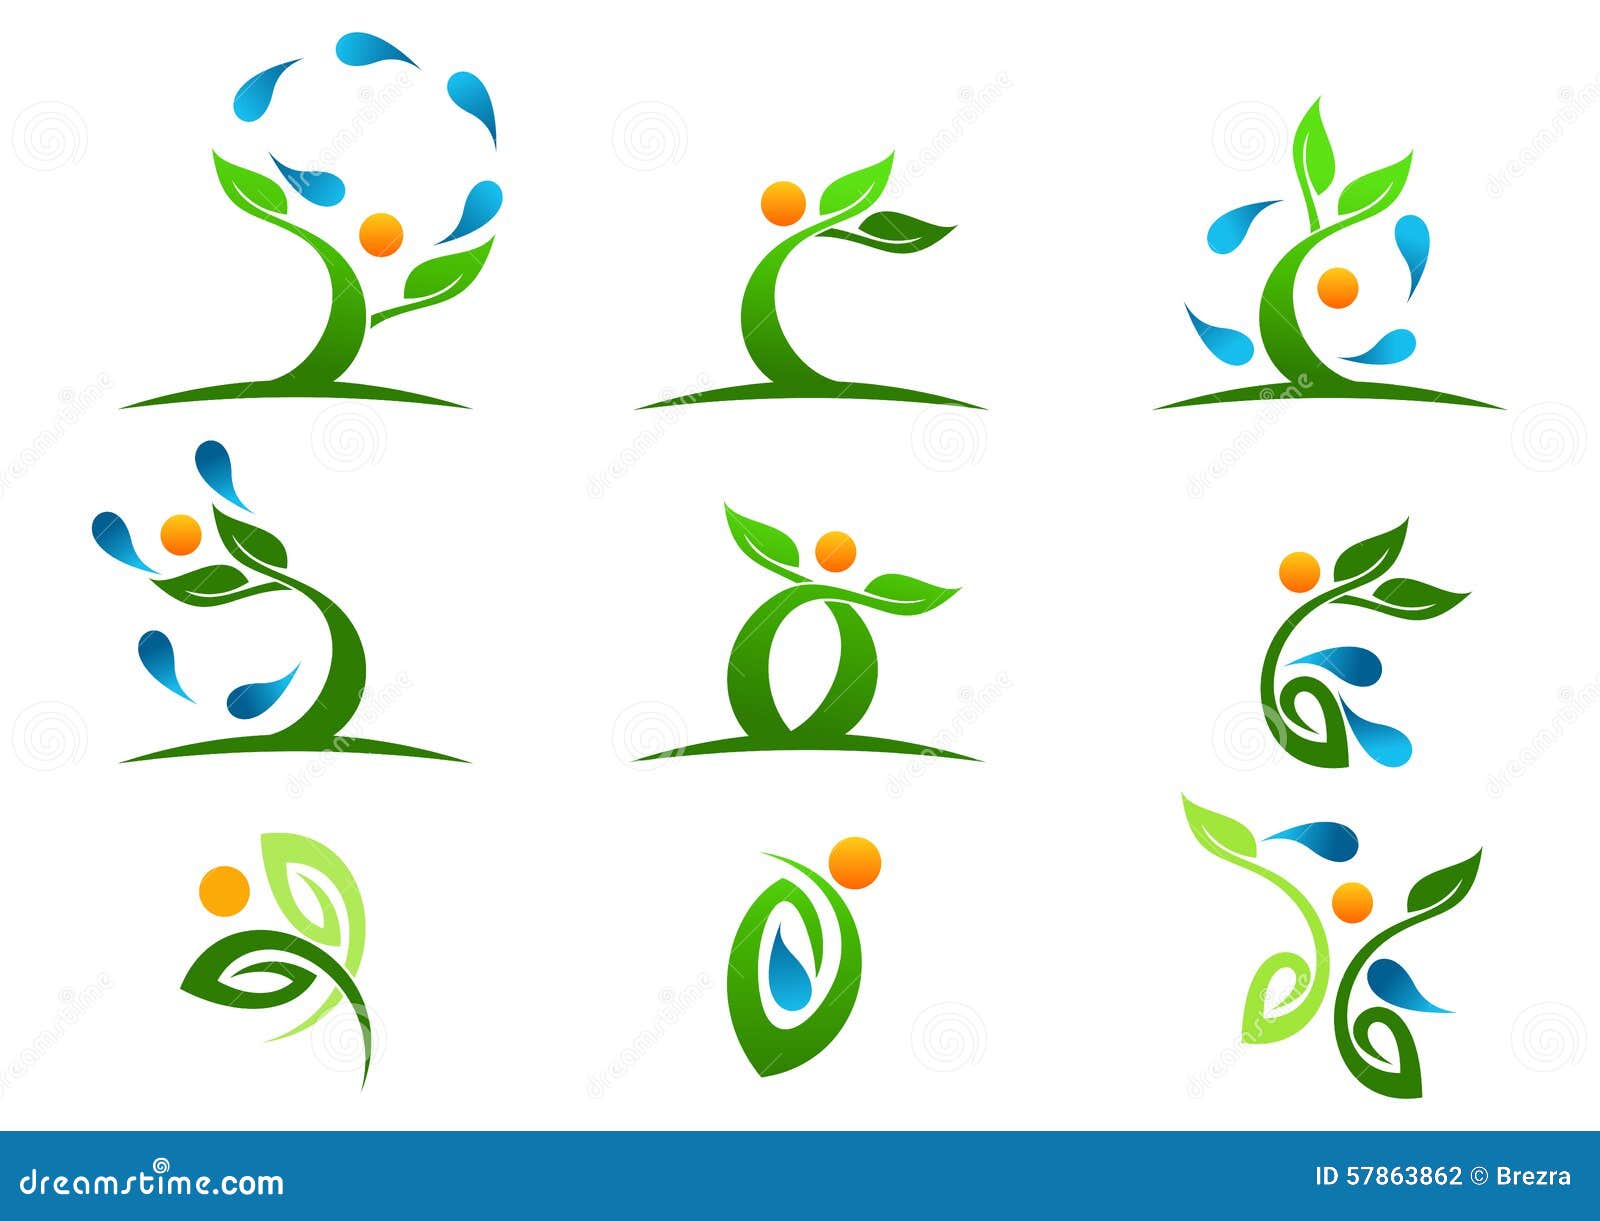 tree,plant,people,water,natural,logo,health,sun,leaf,ecology, icon   set